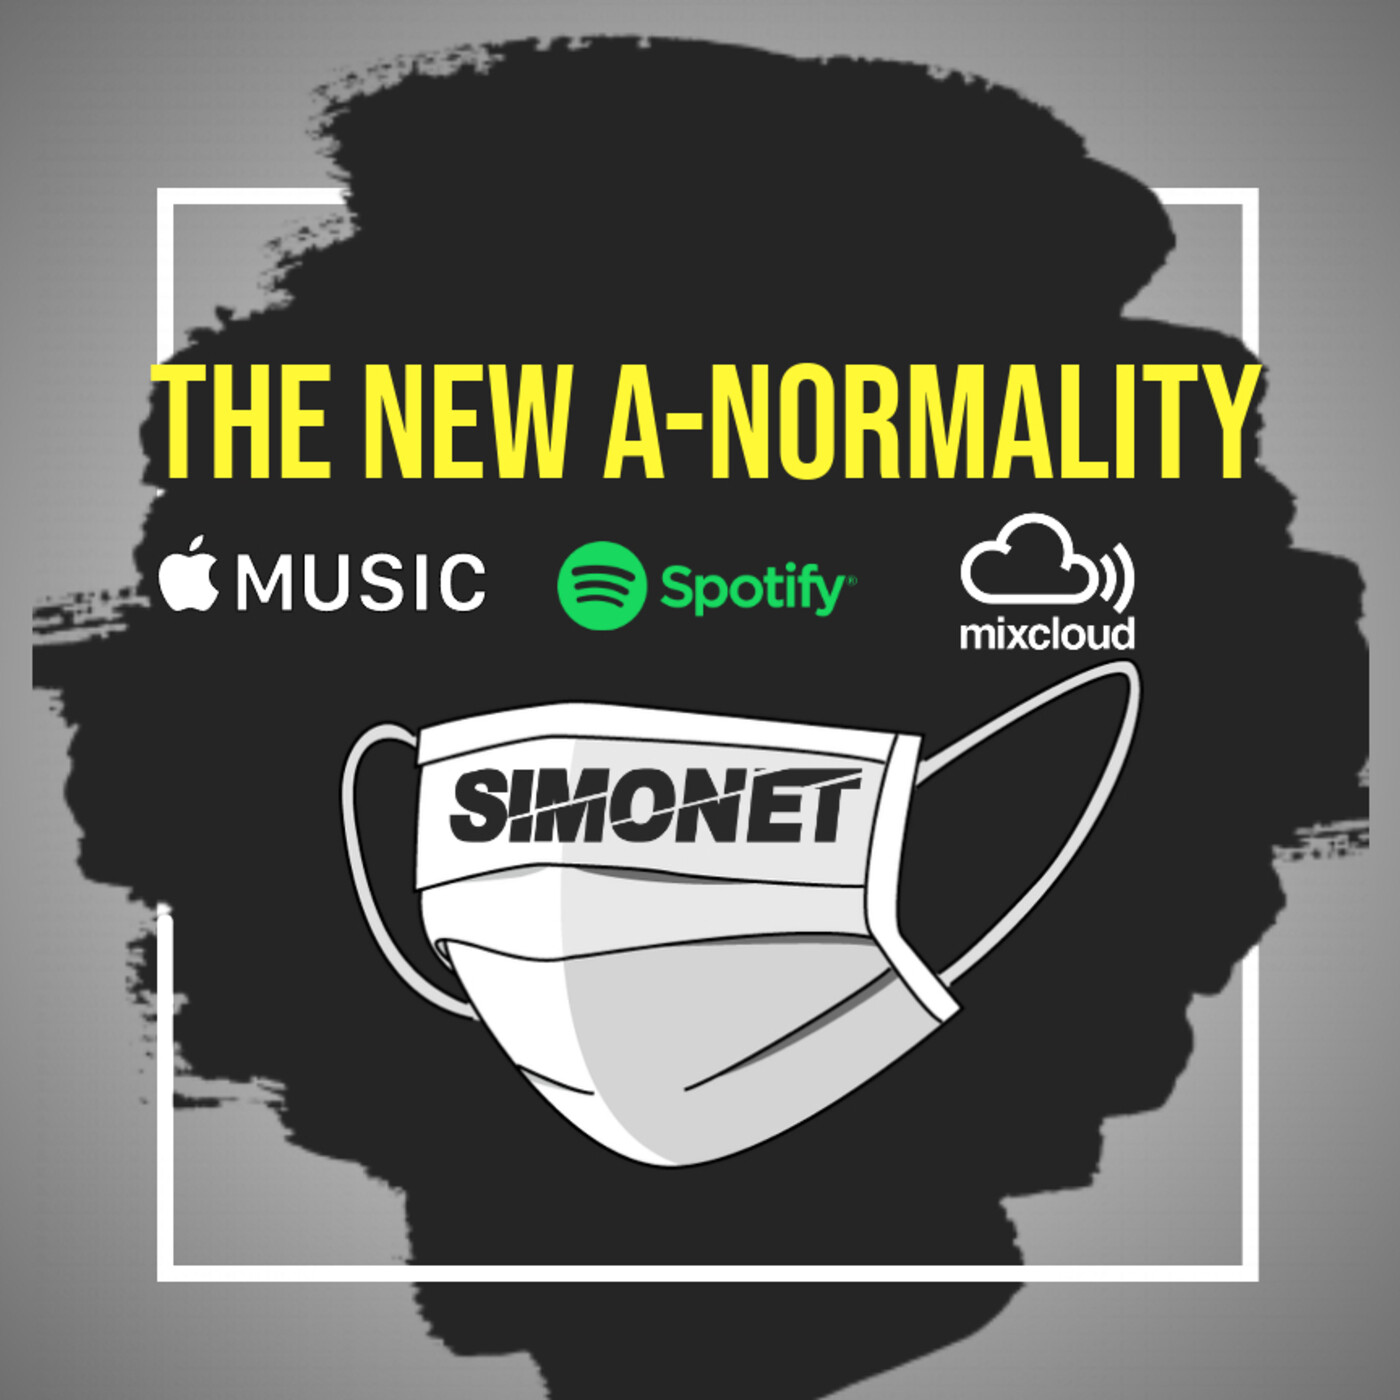 The new a-normality